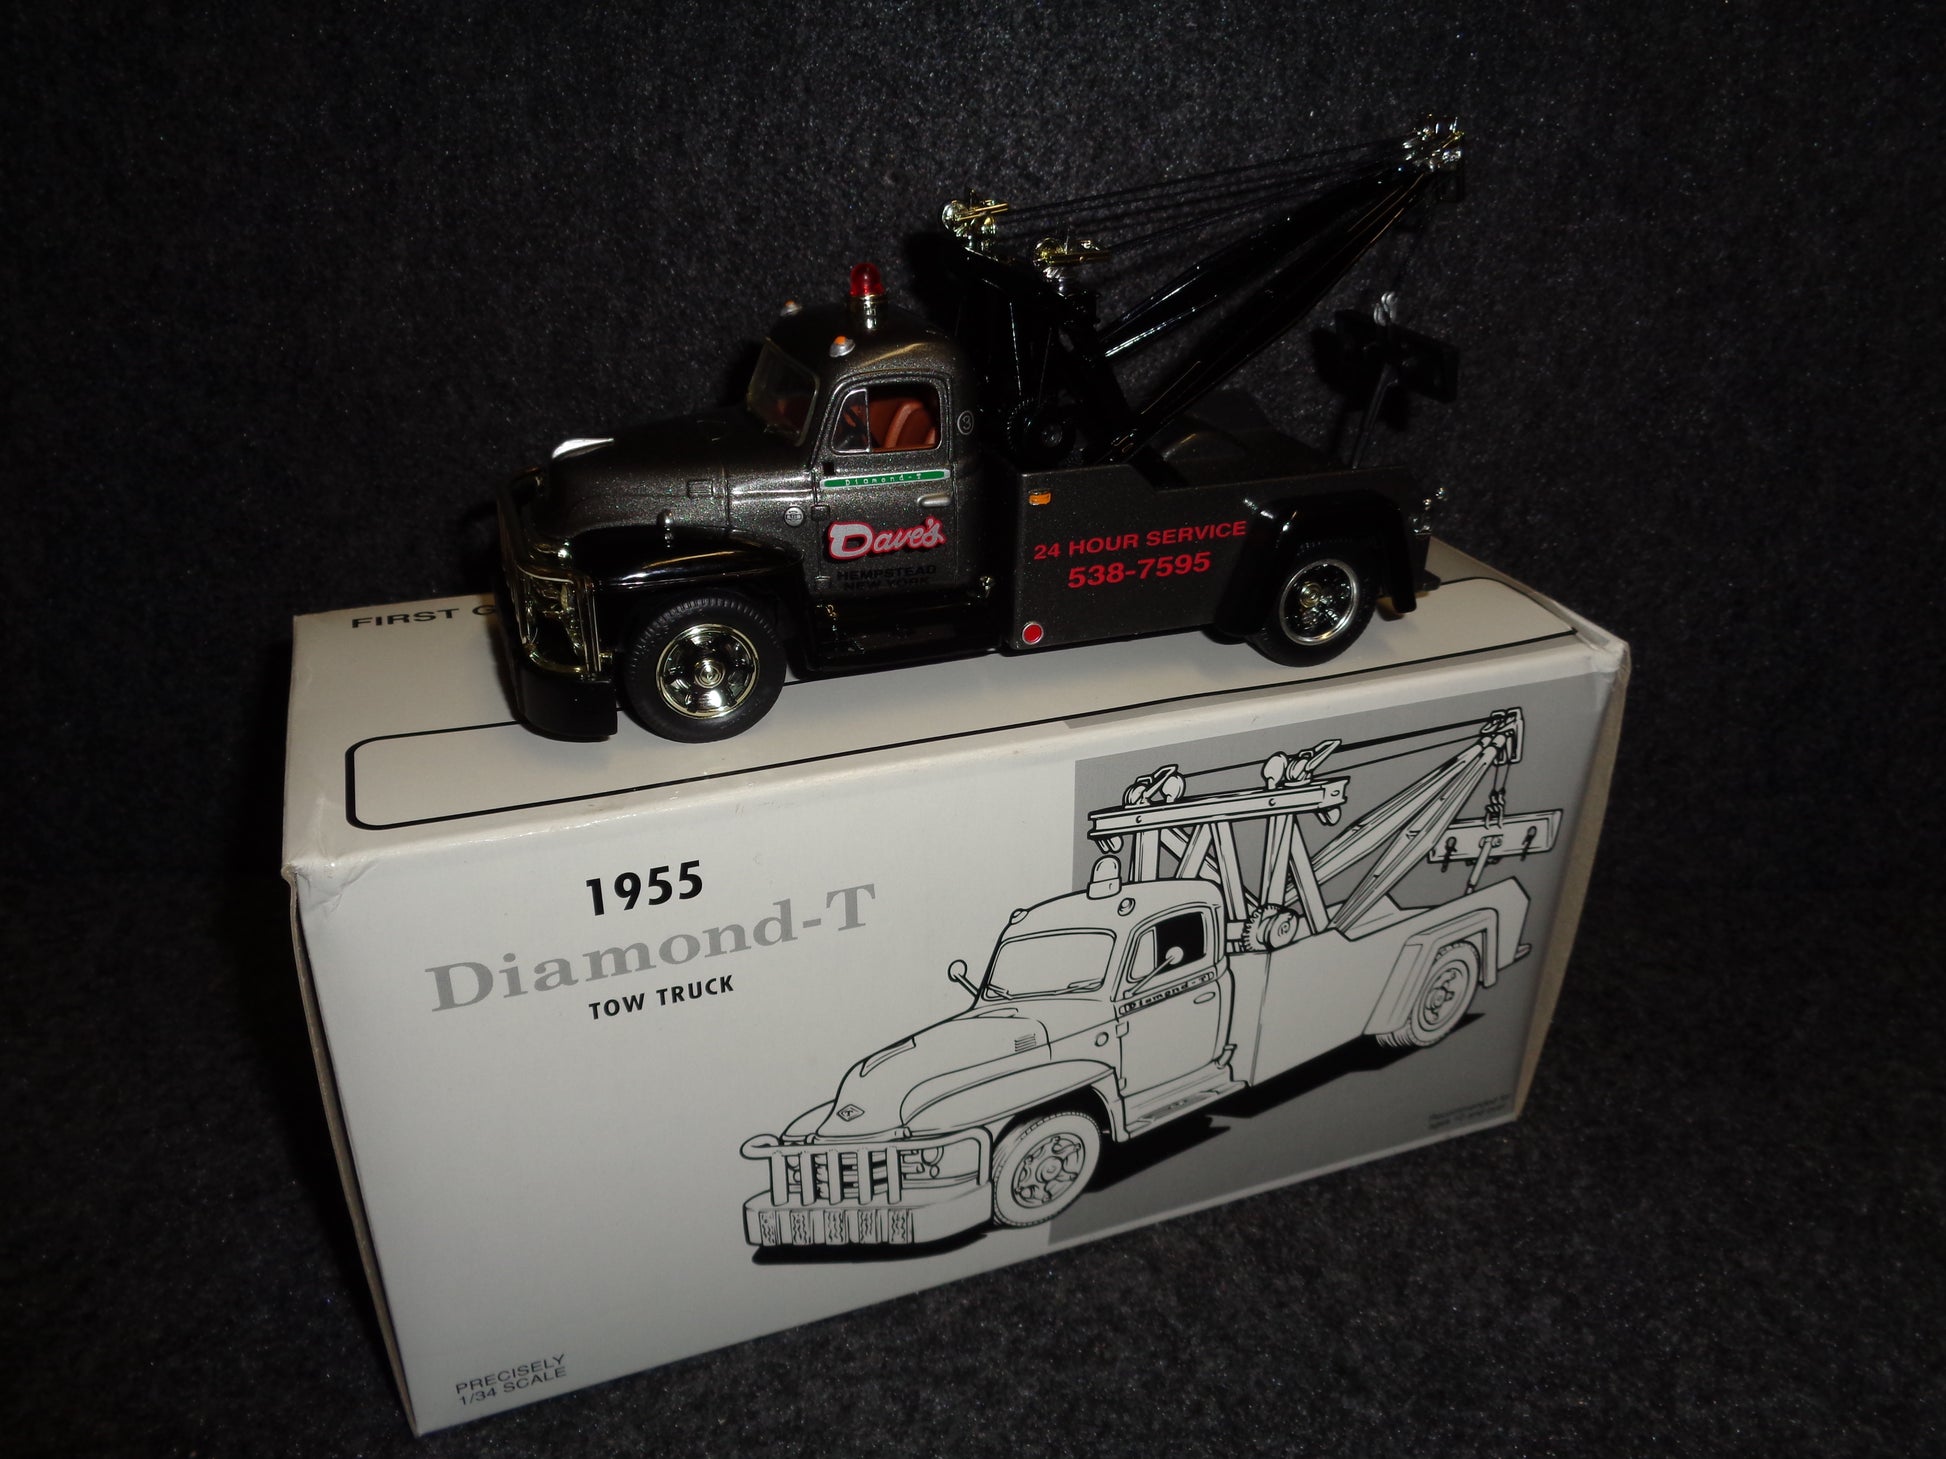 Dave's Towing & Wrecker Service 1955 Diamond T Tow Truck